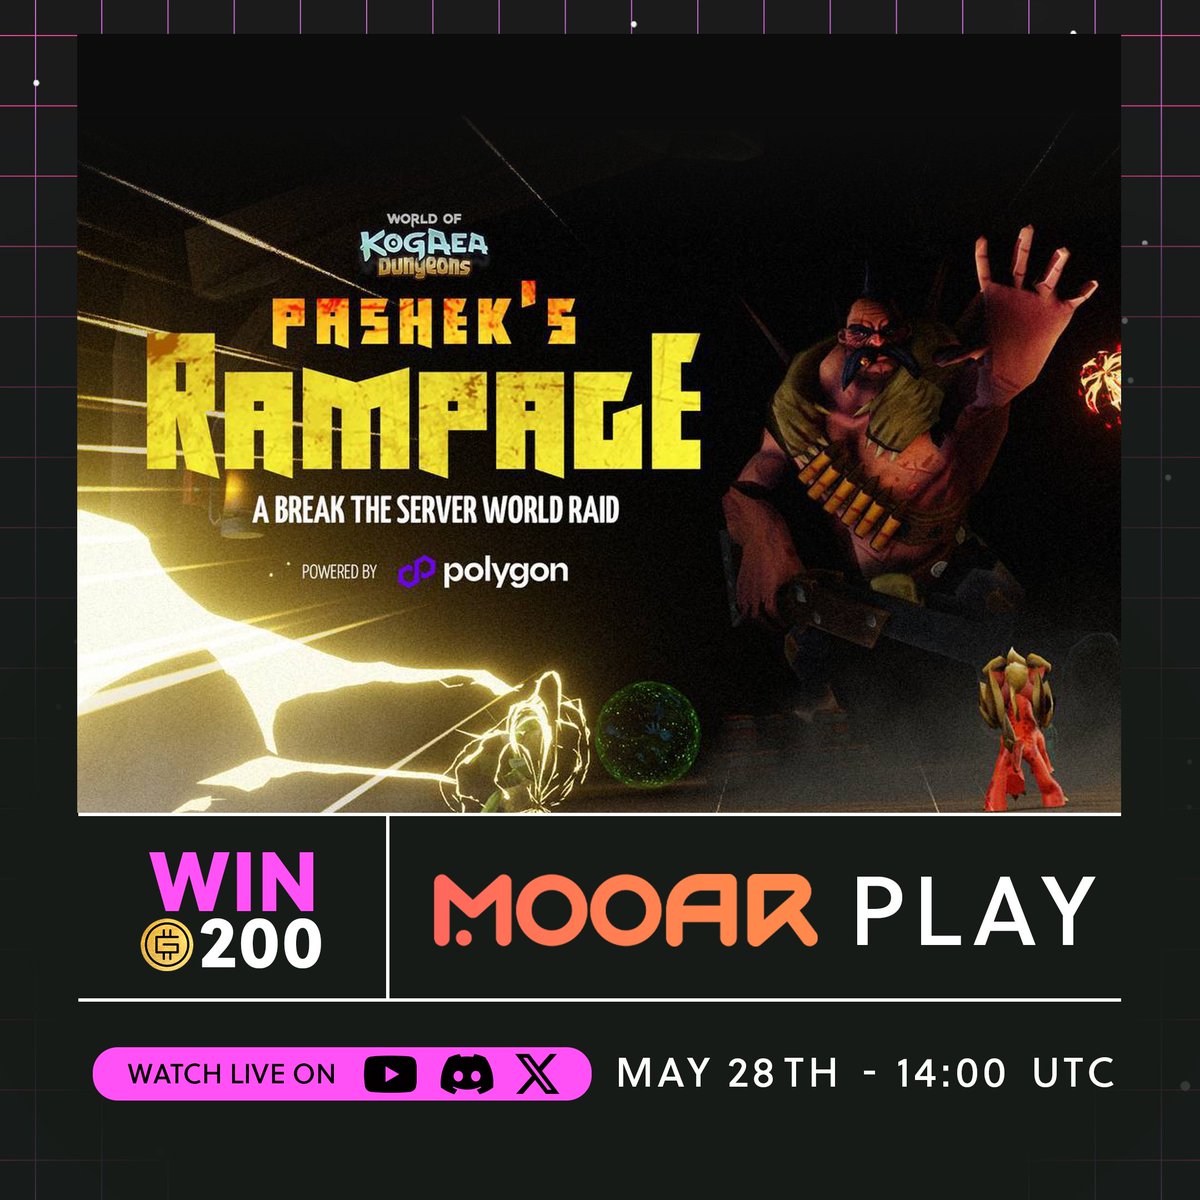 Let the Games Begin! 🏆🔥 😺 We’ve been invited to the @KryptomonTeam World Raid to defeat Pashek! Tune into our Live Stream and join the fun. 📅 May 28th, 14:00 UTC 💸 We’re giving away 200 GMT! All you need to do is: 1️⃣ Follow @mooarofficial and @KryptomonTeam 2️⃣ 💖 & 🔁